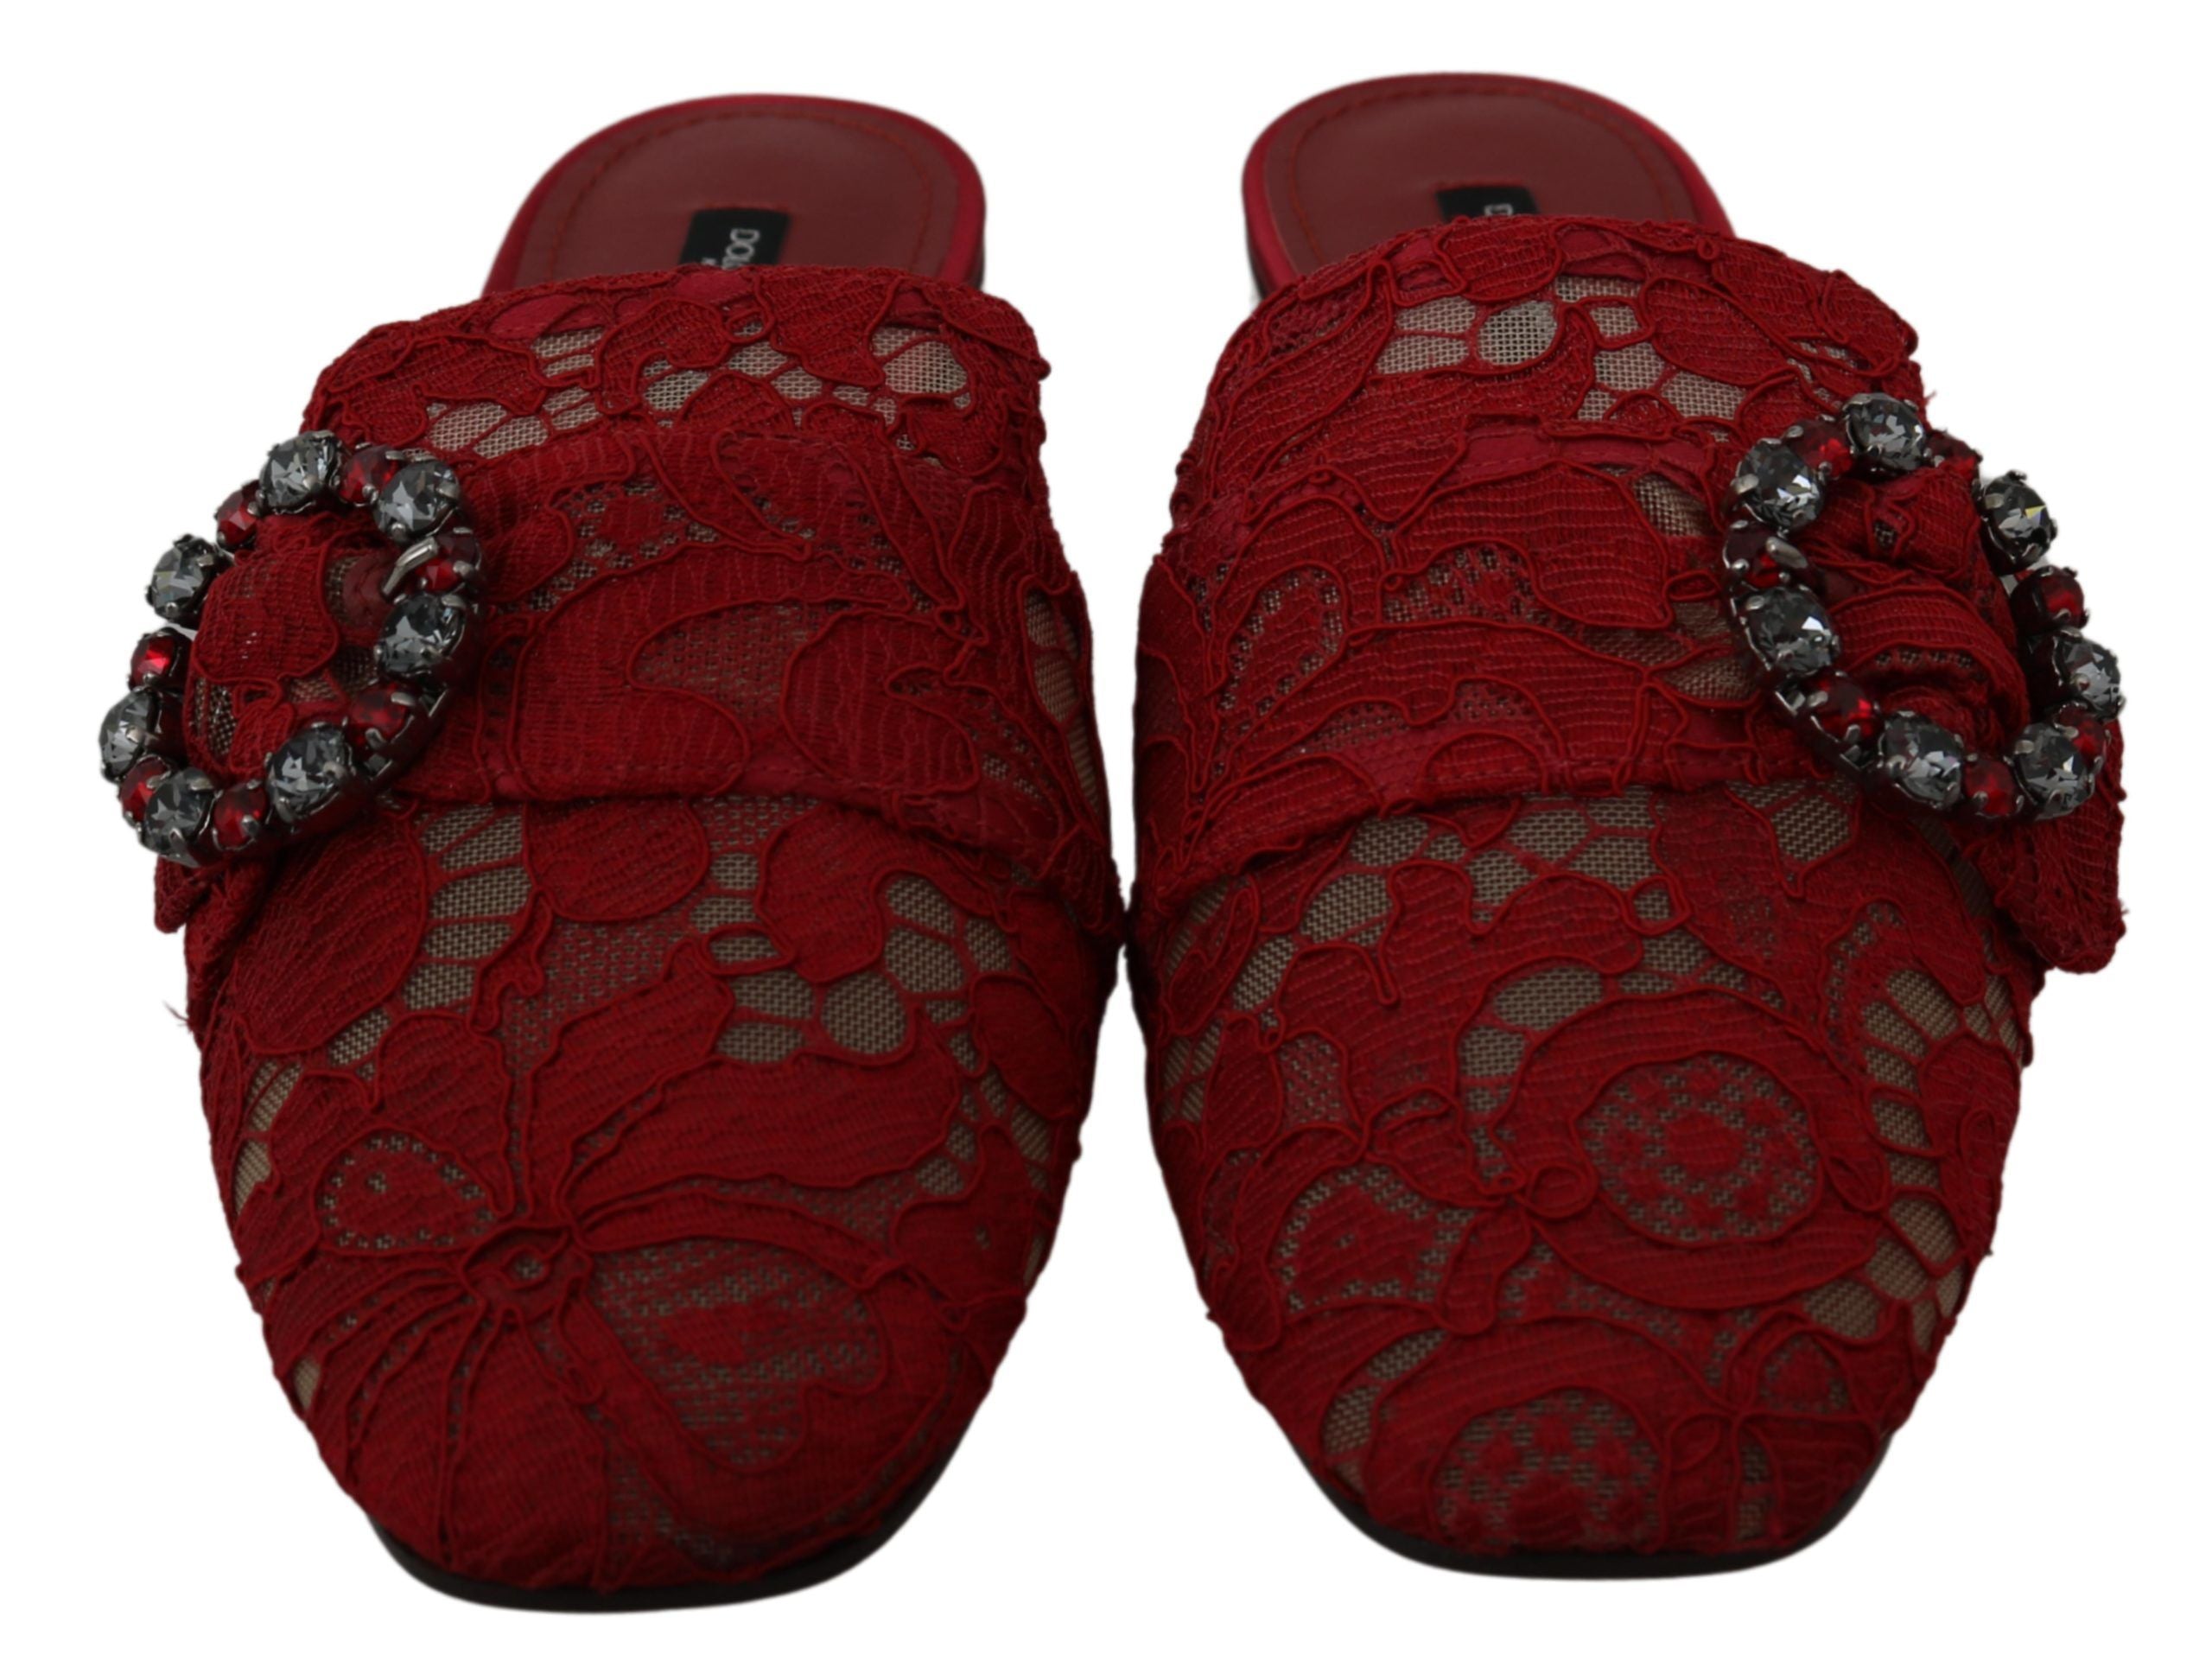 Dolce & Gabbana Radiant Red Slide Flats with Crystal Embellishments